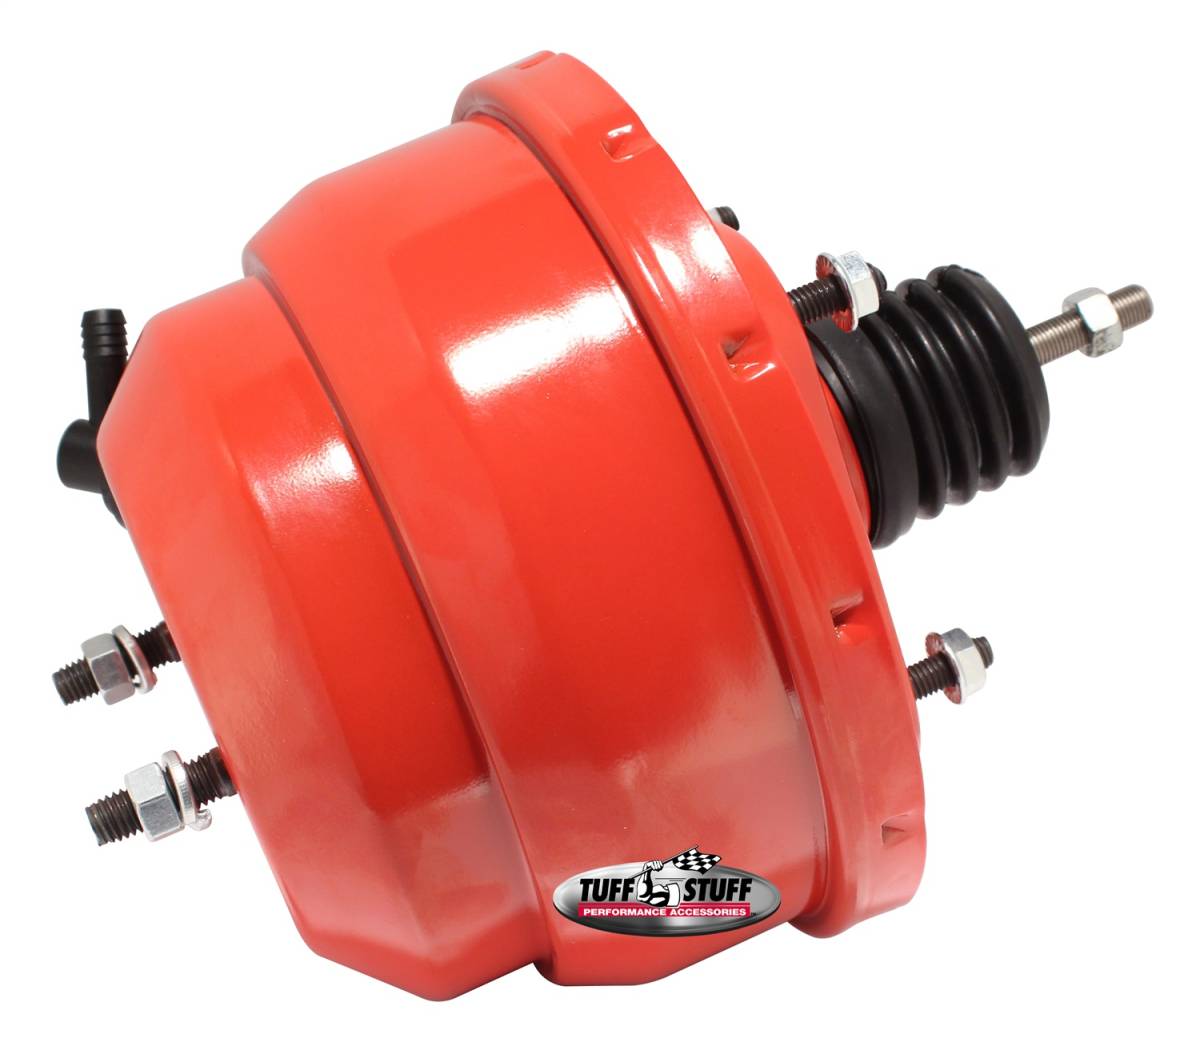 Tuff Stuff Performance - Power Brake Booster Univ. 8 in. Dual Diaphragm Incl. 3/8 in.-16 Mtg. Studs And Nuts Fits Hot Rods/Customs/Muscle Cars Red Powdercoat 2223NCRED